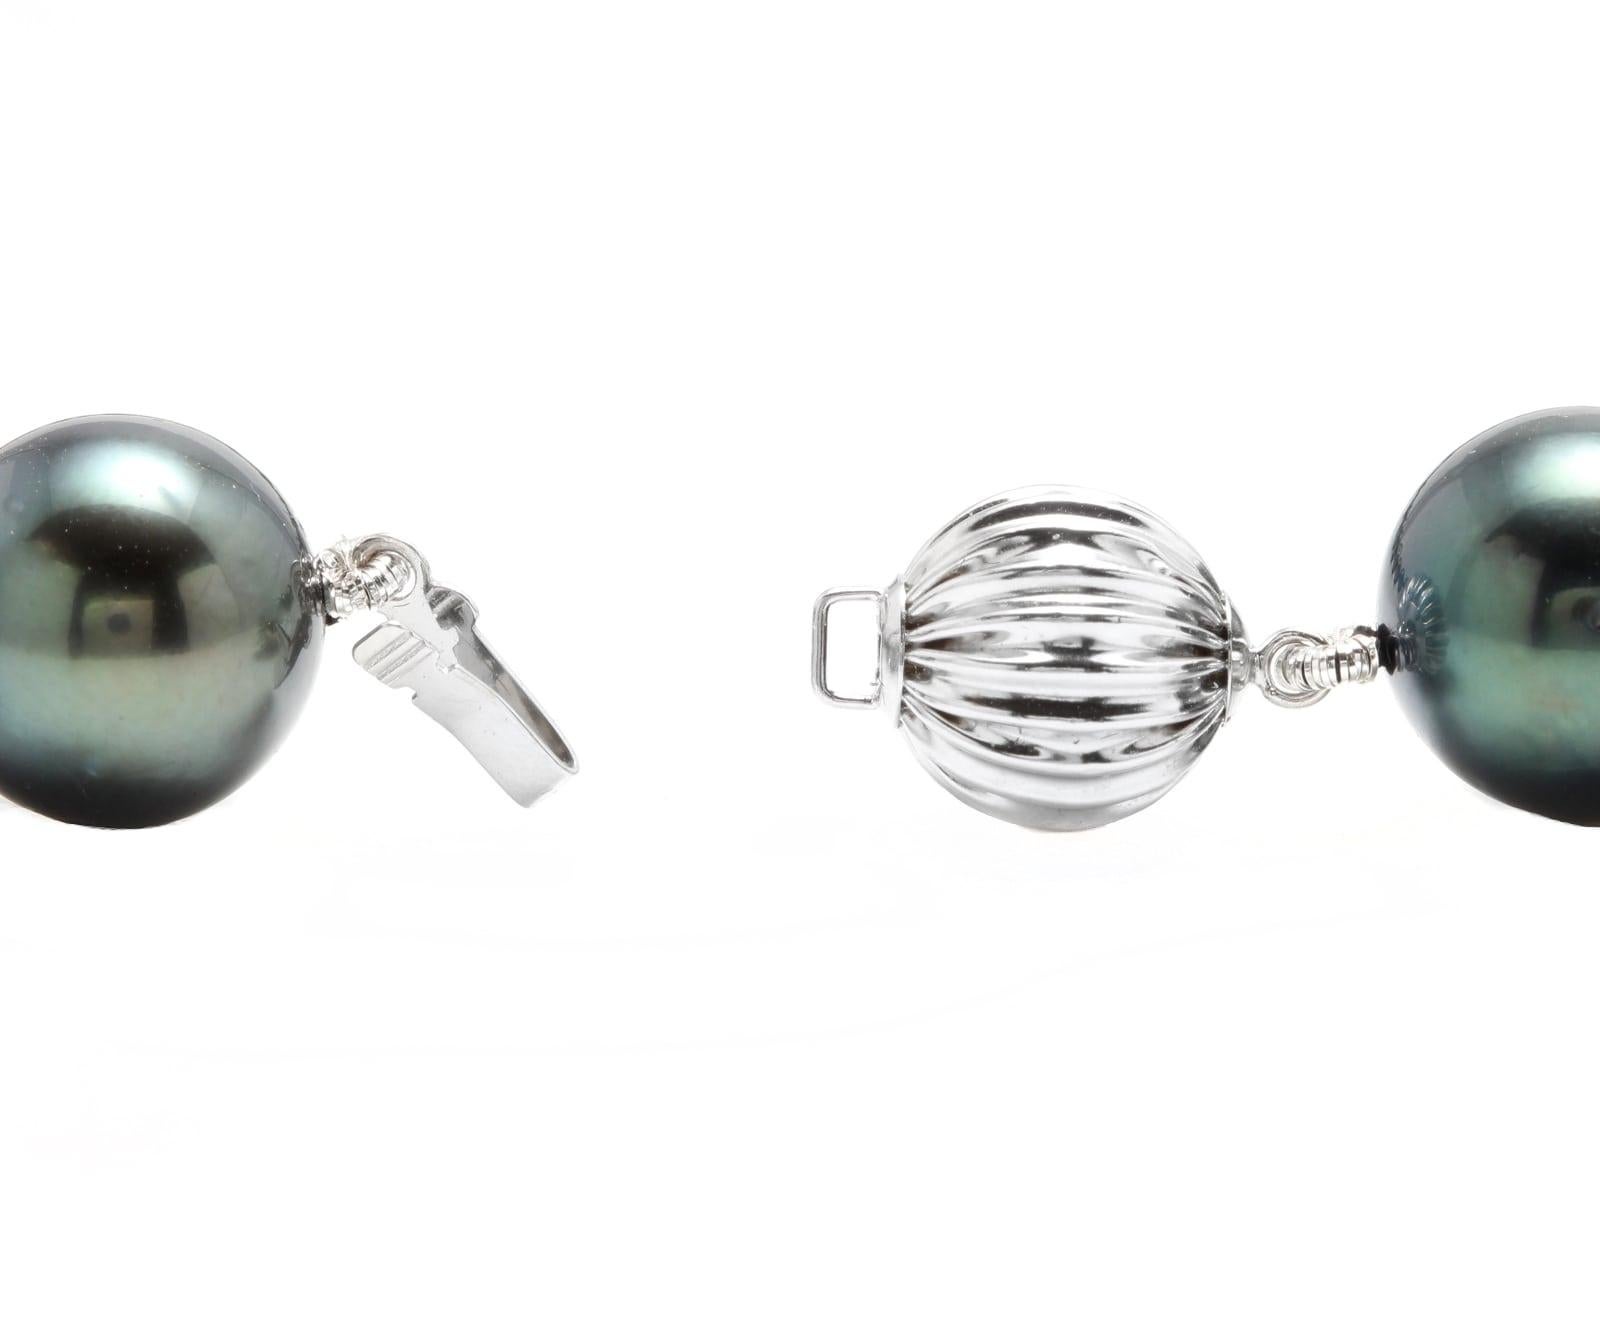 Stunning 12-14.80mm Tahitian Pearl Necklace 14K Solid White Gold Clasp 

Suggested Replacement Value: $8,000.00

Clasp 14k Solid White Gold

Total Natural Tahitian Pearls Measure: 12 - 14.80mm

Necklace Length: 18